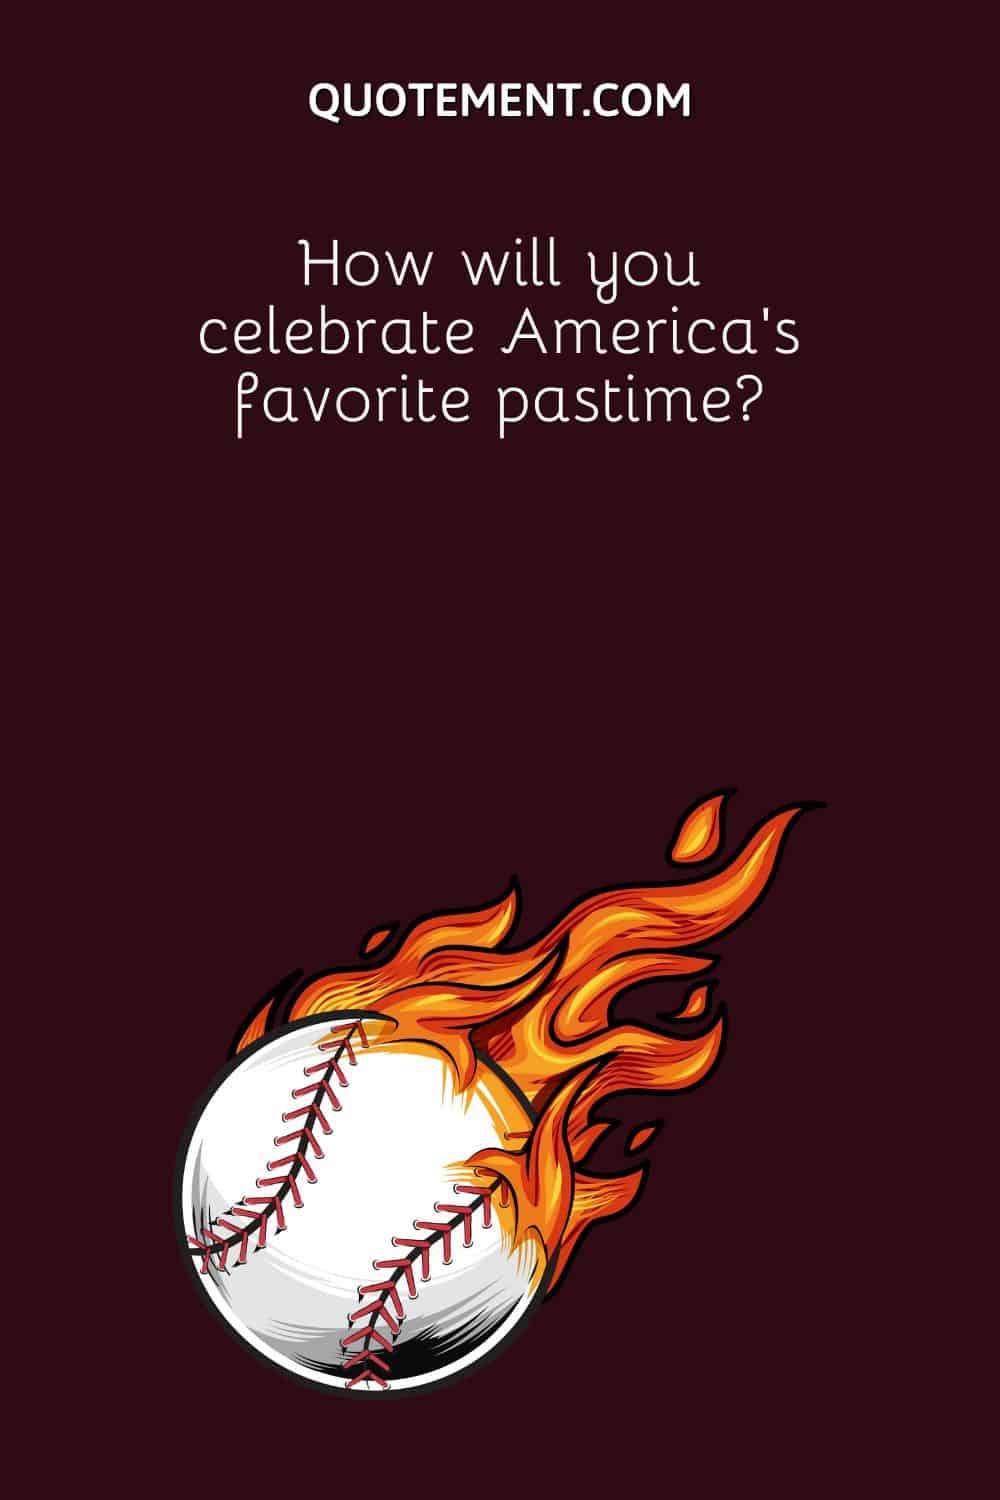 How will you celebrate America’s favorite pastime